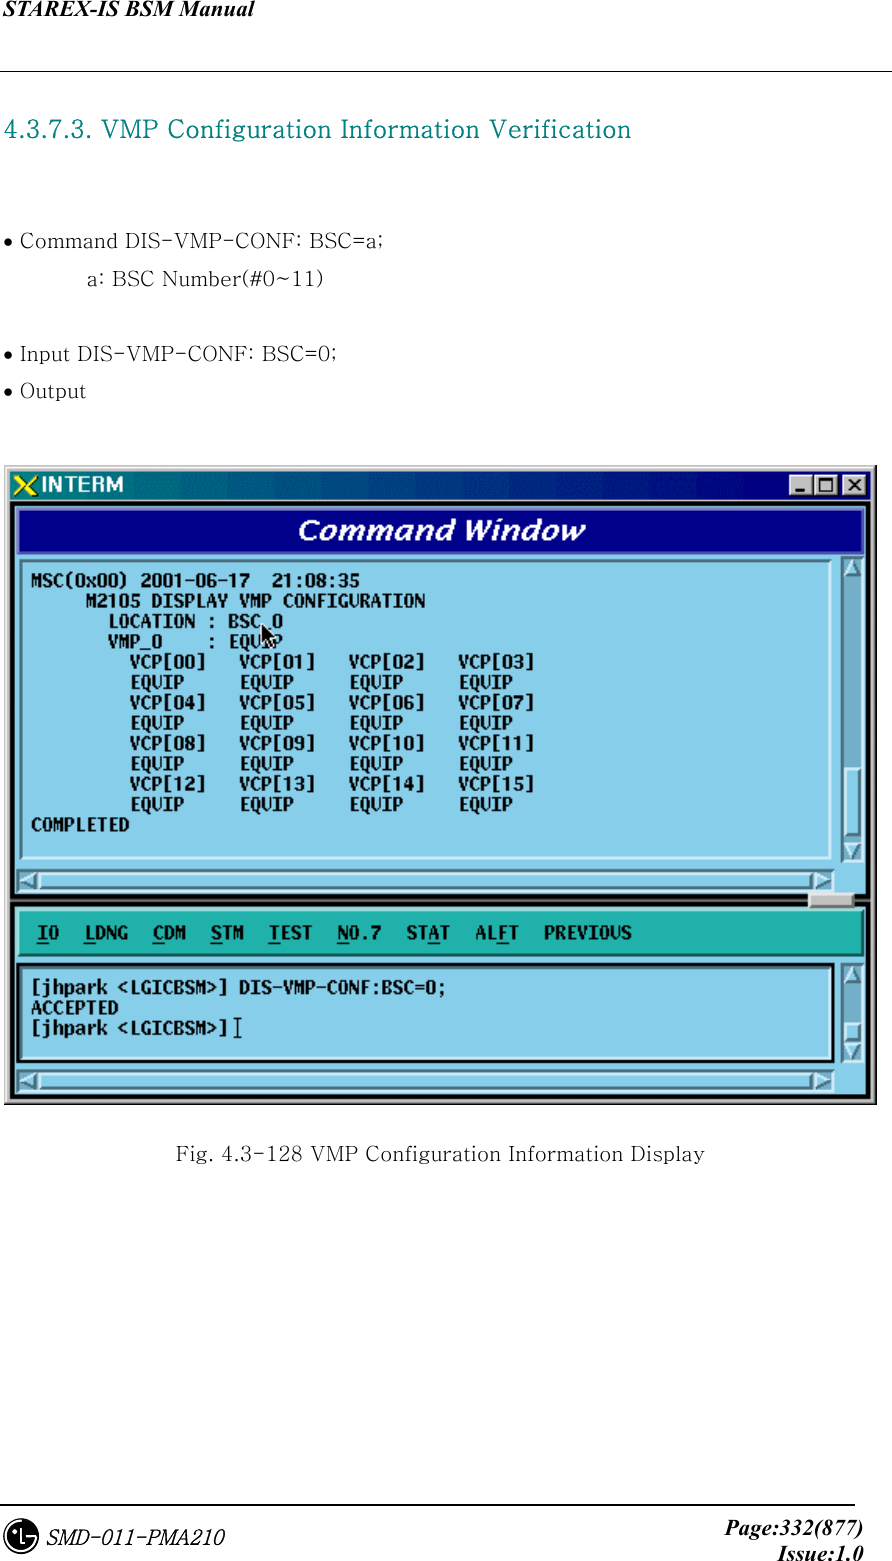 STAREX-IS BSM Manual     Page:332(877)Issue:1.0SMD-011-PMA210  4.3.7.3. VMP Configuration Information Verification   • Command DIS-VMP-CONF: BSC=a;     a: BSC Number(#0~11)  • Input DIS-VMP-CONF: BSC=0; • Output   Fig. 4.3-128 VMP Configuration Information Display 